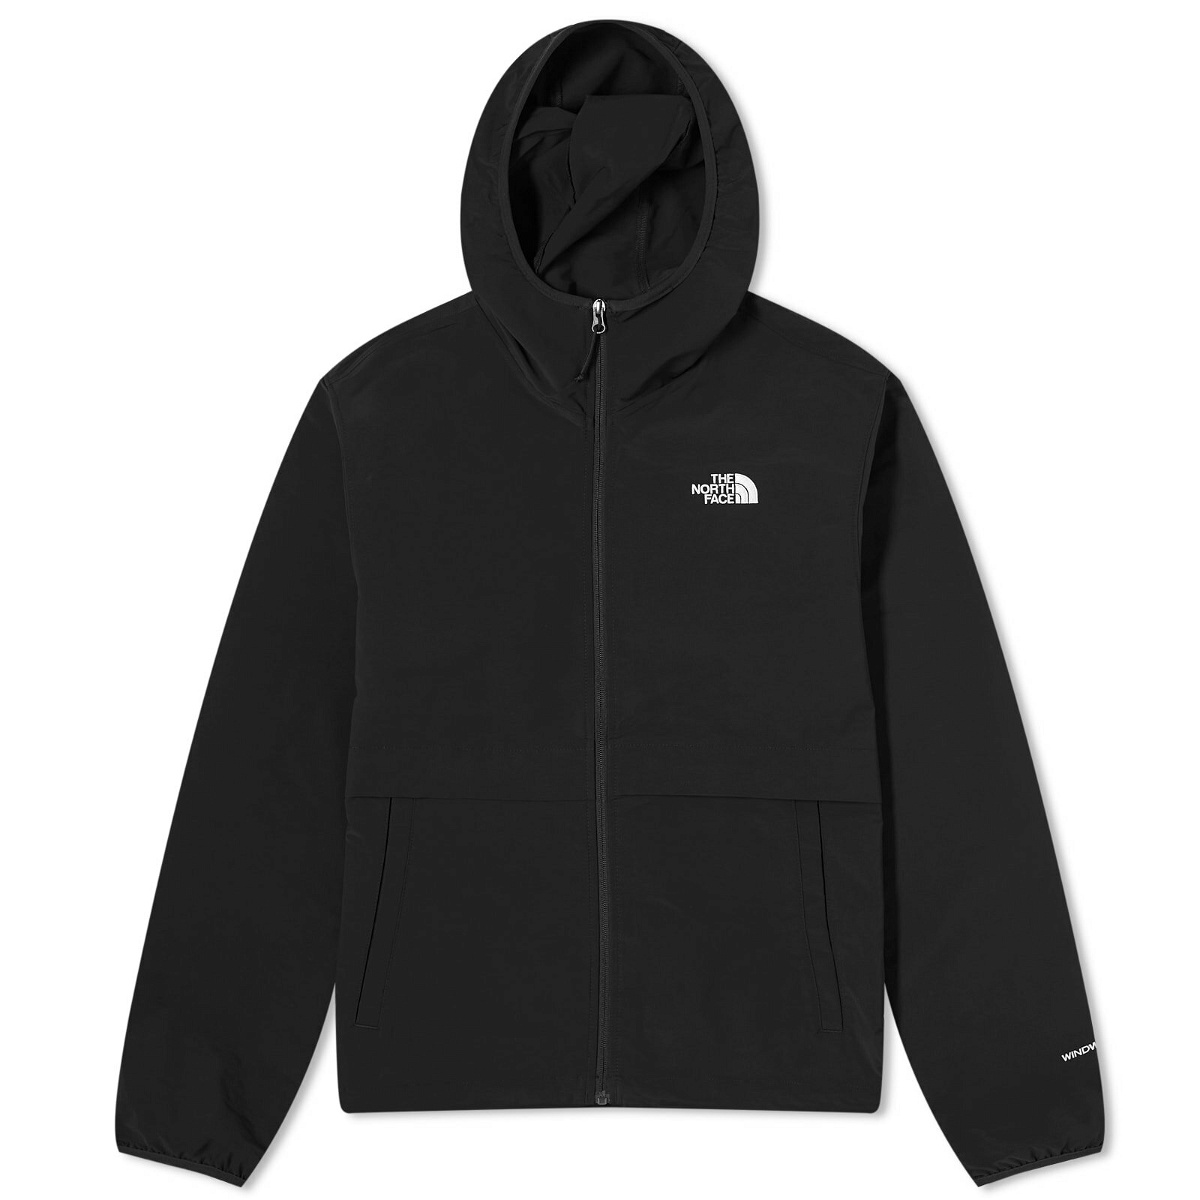 Photo: The North Face Men's Easy Wind Jacket in Tnf Black